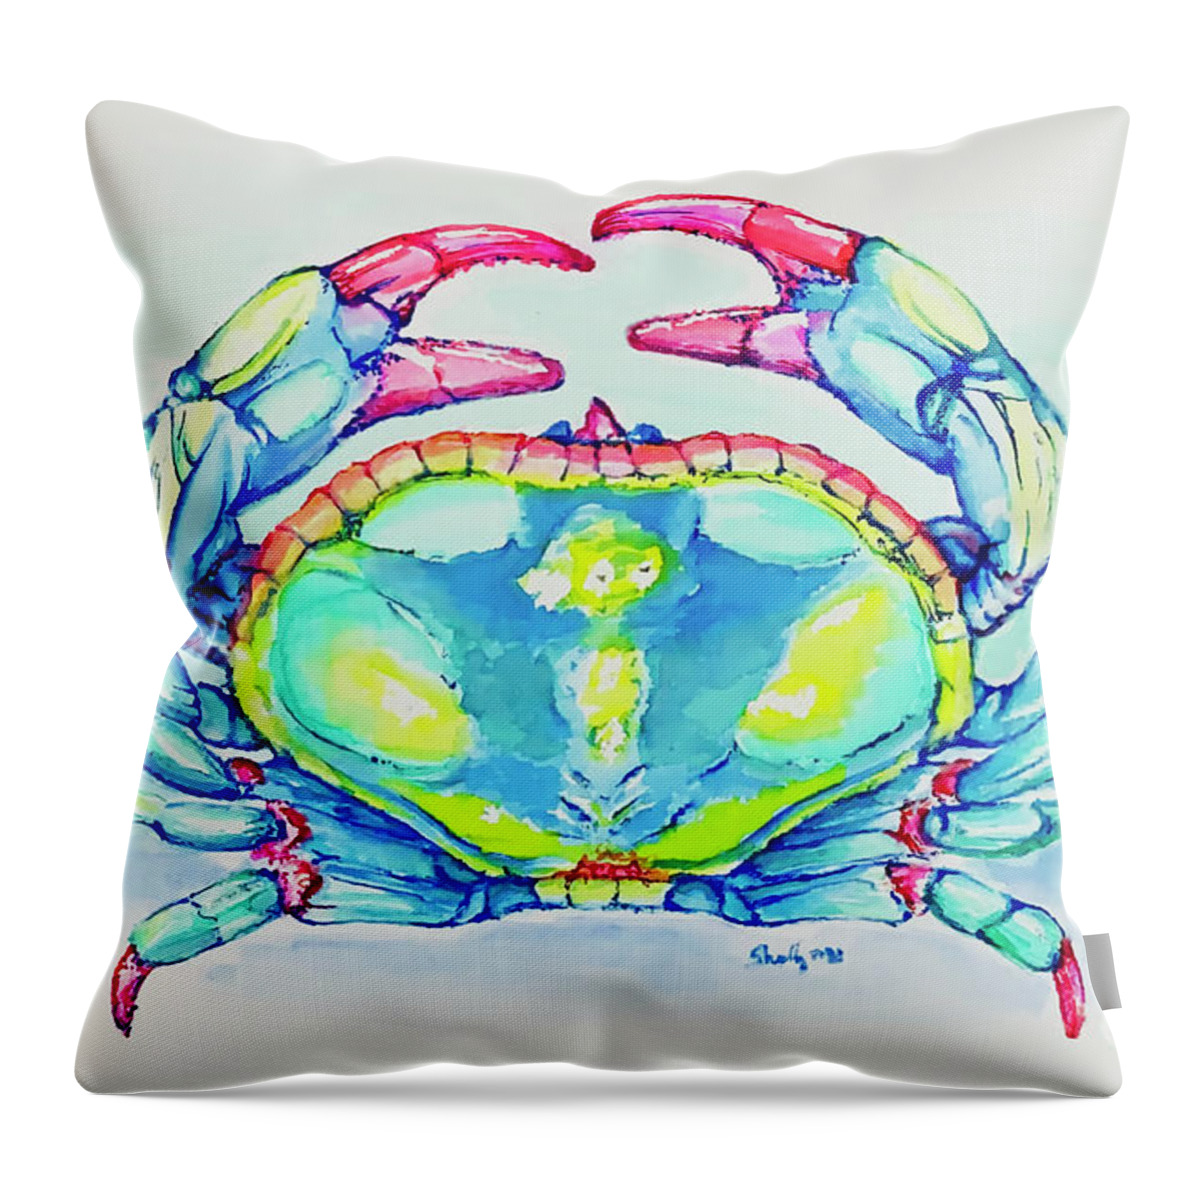 Crab Throw Pillow featuring the painting Key West Crab 2021 by Shelly Tschupp